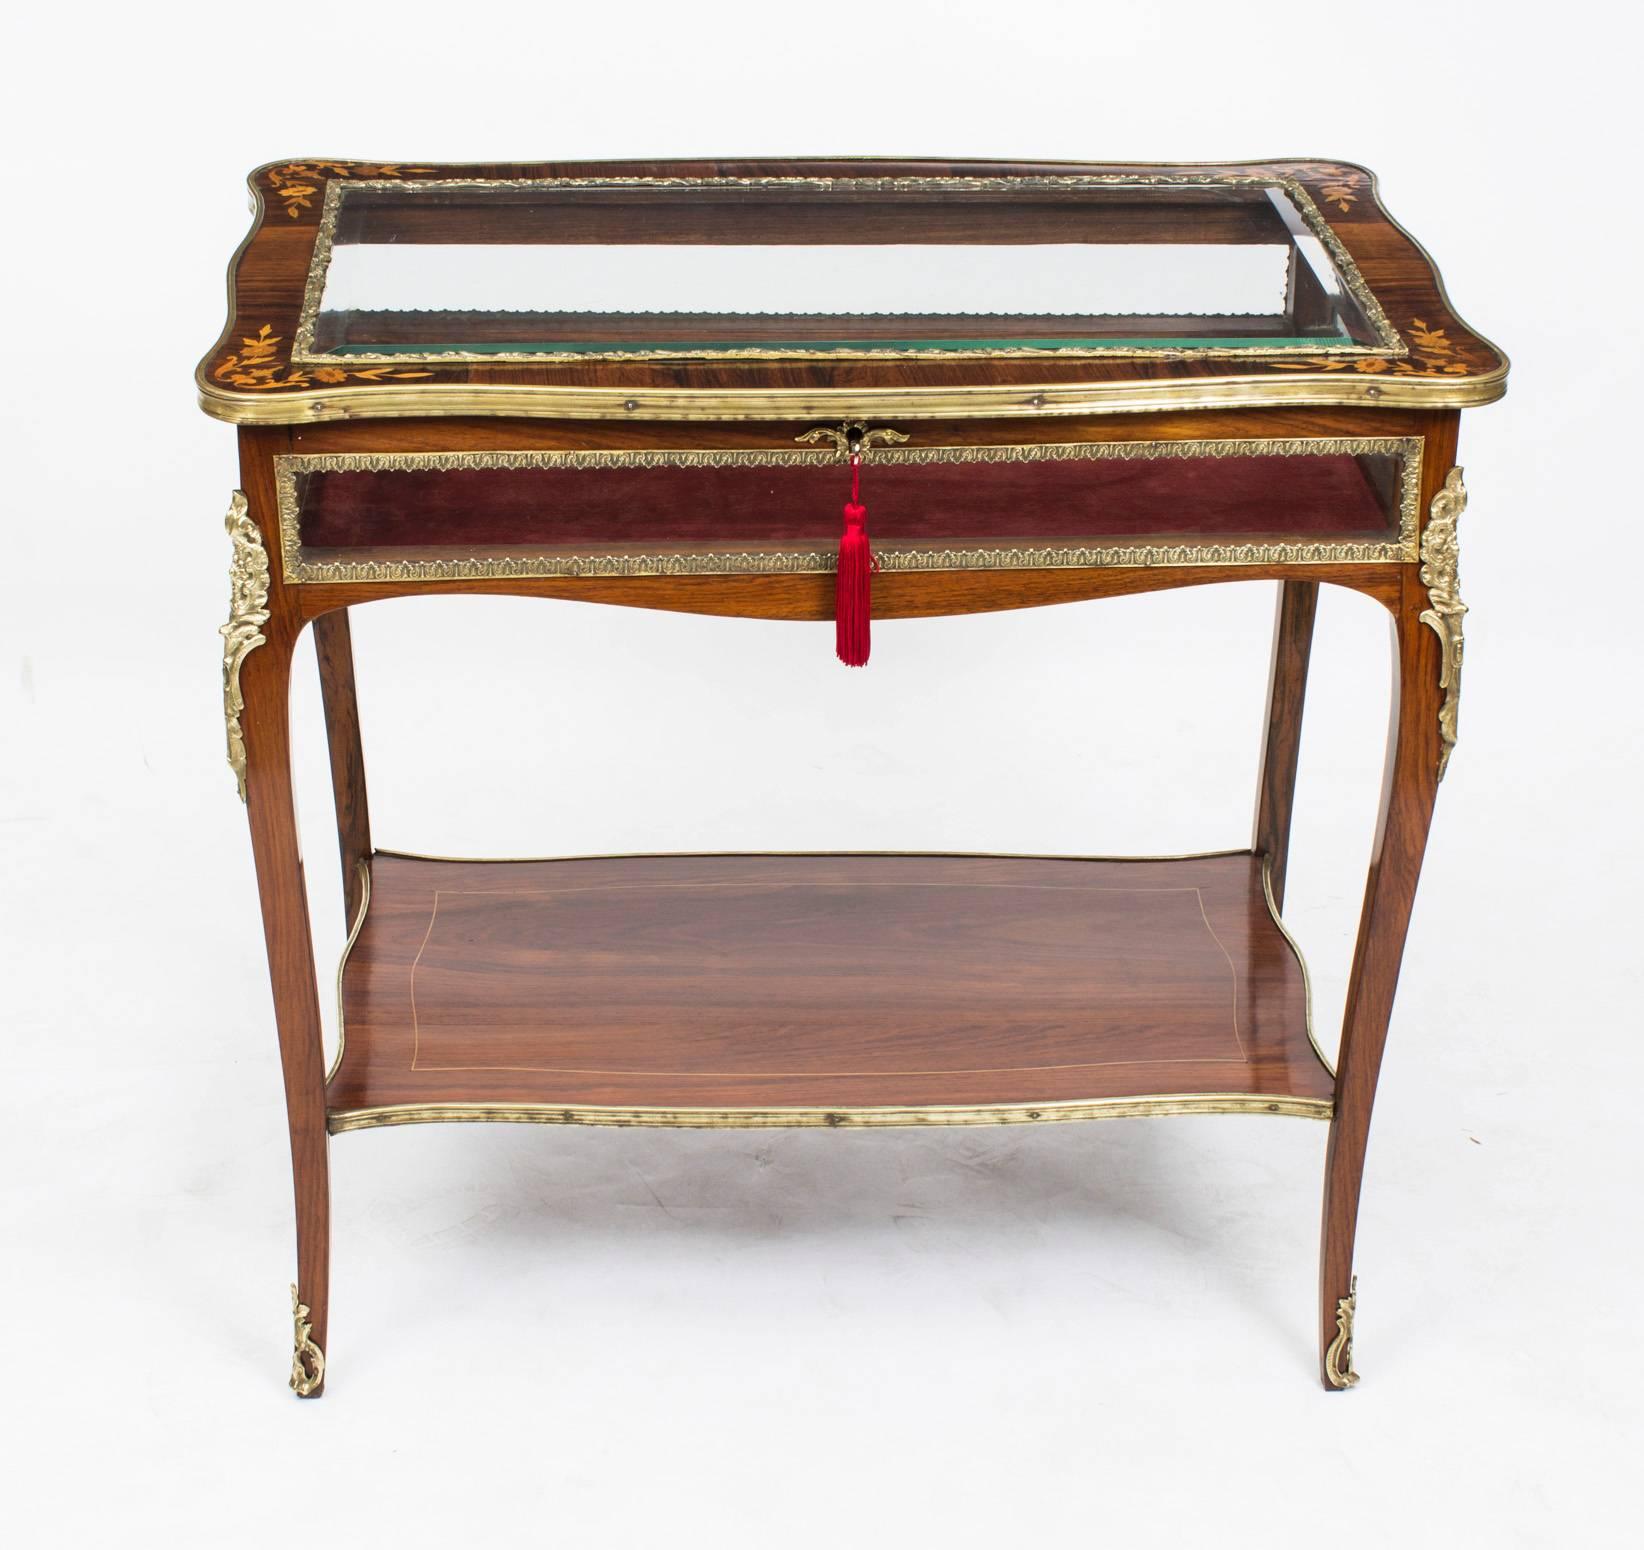 This is a beautiful antique French ormolu-mounted Rosewood and marquetry serpentine bijouterie table in the Louis XV manner, circa 1880 in date.

The hinged top with a bevelled glass pane, inlaid with a border of flowers and scrolling foliage. The